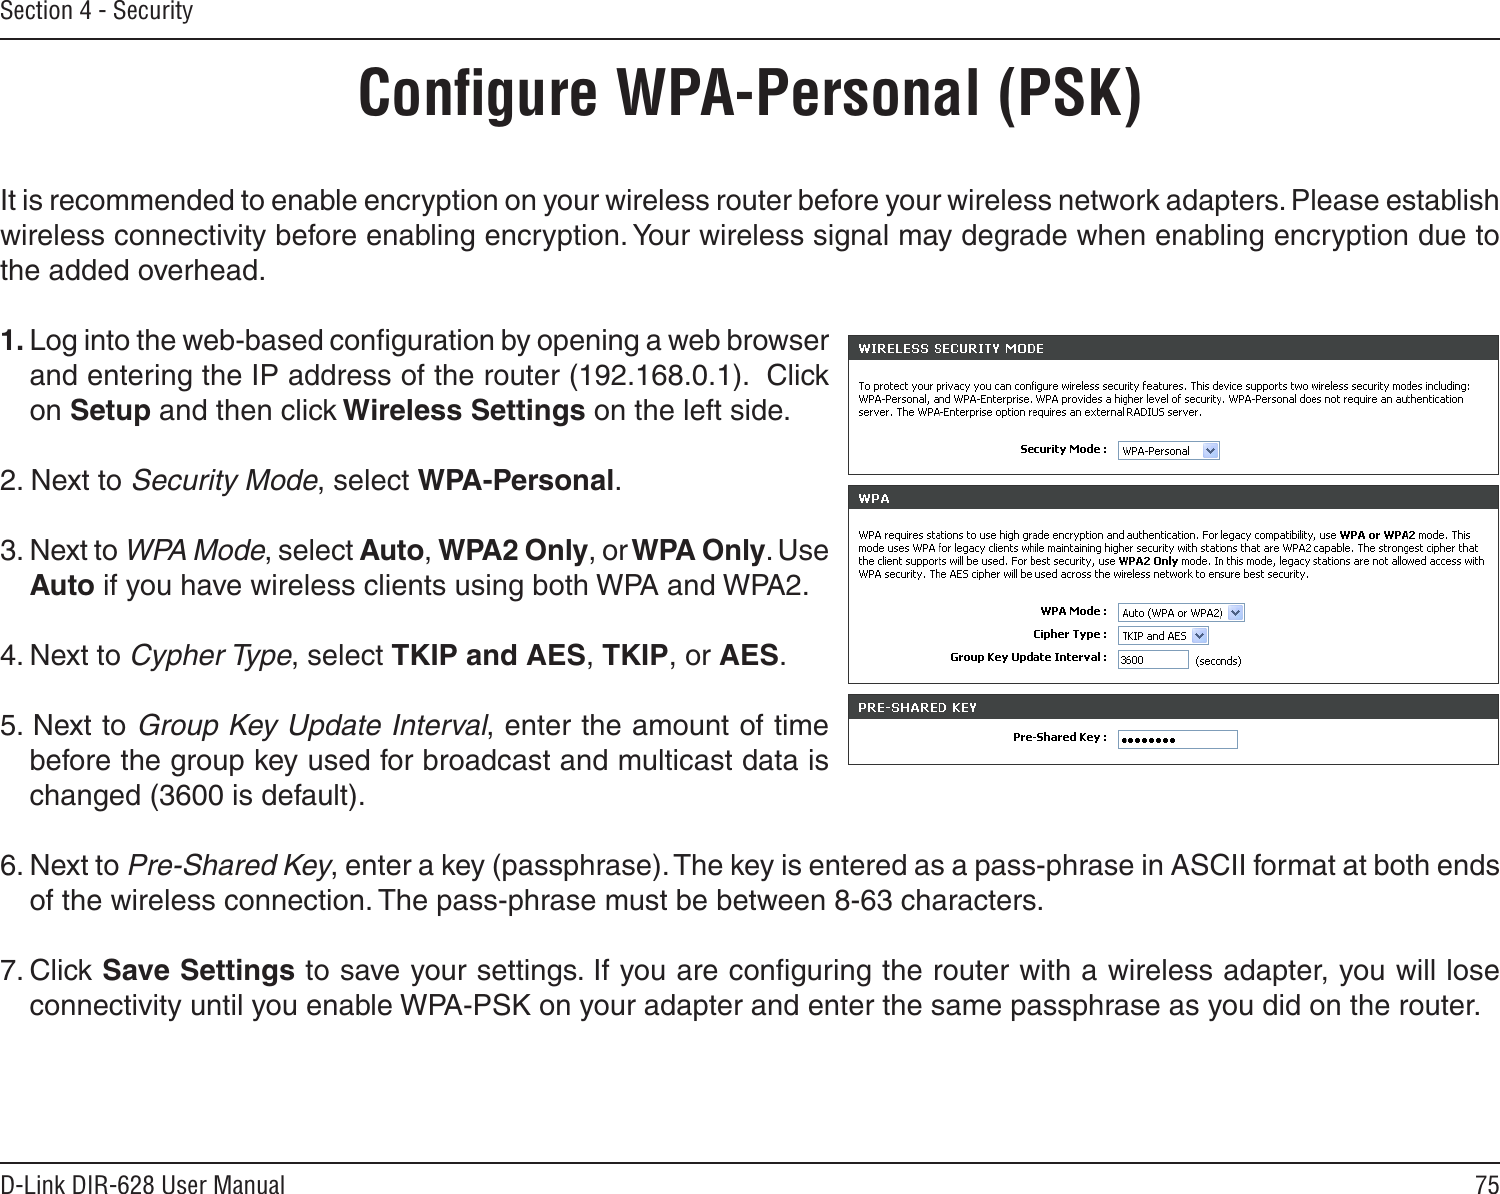 75D-Link DIR-628 User ManualSection 4 - SecurityConﬁgure WPA-Personal (PSK)It is recommended to enable encryption on your wireless router before your wireless network adapters. Please establish wireless connectivity before enabling encryption. Your wireless signal may degrade when enabling encryption due to the added overhead.1. Log into the web-based conﬁguration by opening a web browser and entering the IP address of the router (192.168.0.1).  Click on Setup and then click Wireless Settings on the left side.2. Next to Security Mode, select WPA-Personal.3. Next to WPA Mode, select Auto, WPA2 Only, or WPA Only. Use Auto if you have wireless clients using both WPA and WPA2.4. Next to Cypher Type, select TKIP and AES, TKIP, or AES.5. Next to Group Key Update Interval, enter the amount of time before the group key used for broadcast and multicast data is changed (3600 is default).6. Next to Pre-Shared Key, enter a key (passphrase). The key is entered as a pass-phrase in ASCII format at both ends of the wireless connection. The pass-phrase must be between 8-63 characters. 7. Click Save Settings to save your settings. If you are conﬁguring the router with a wireless adapter, you will lose connectivity until you enable WPA-PSK on your adapter and enter the same passphrase as you did on the router.